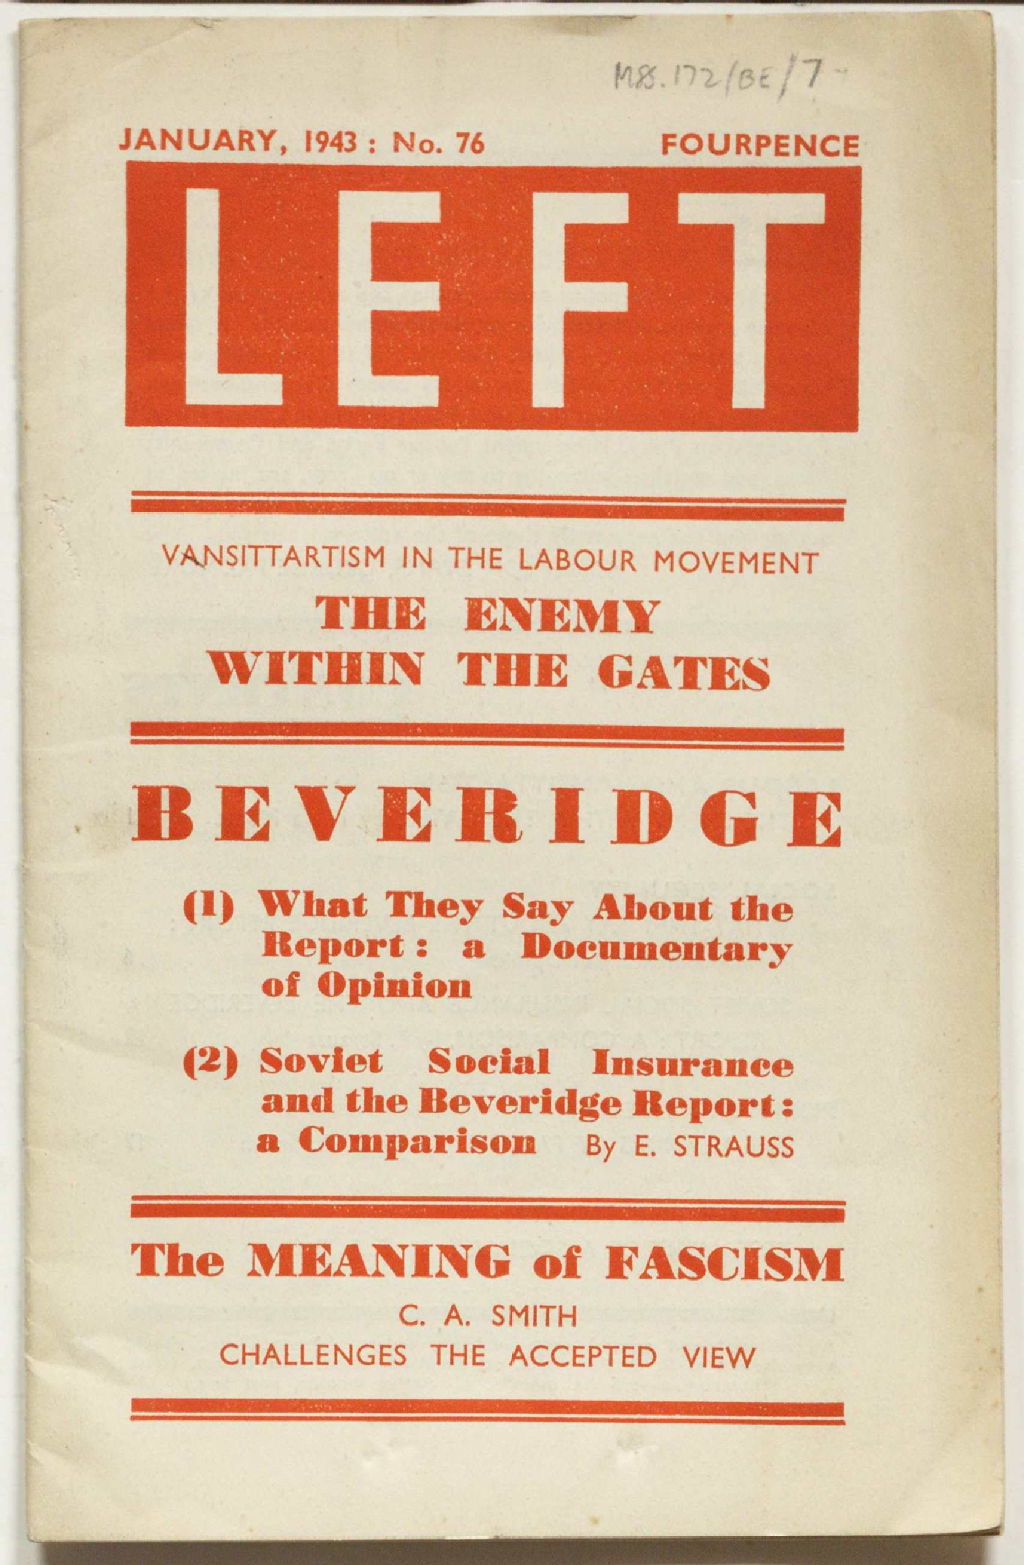 What they say about the Beveridge Report